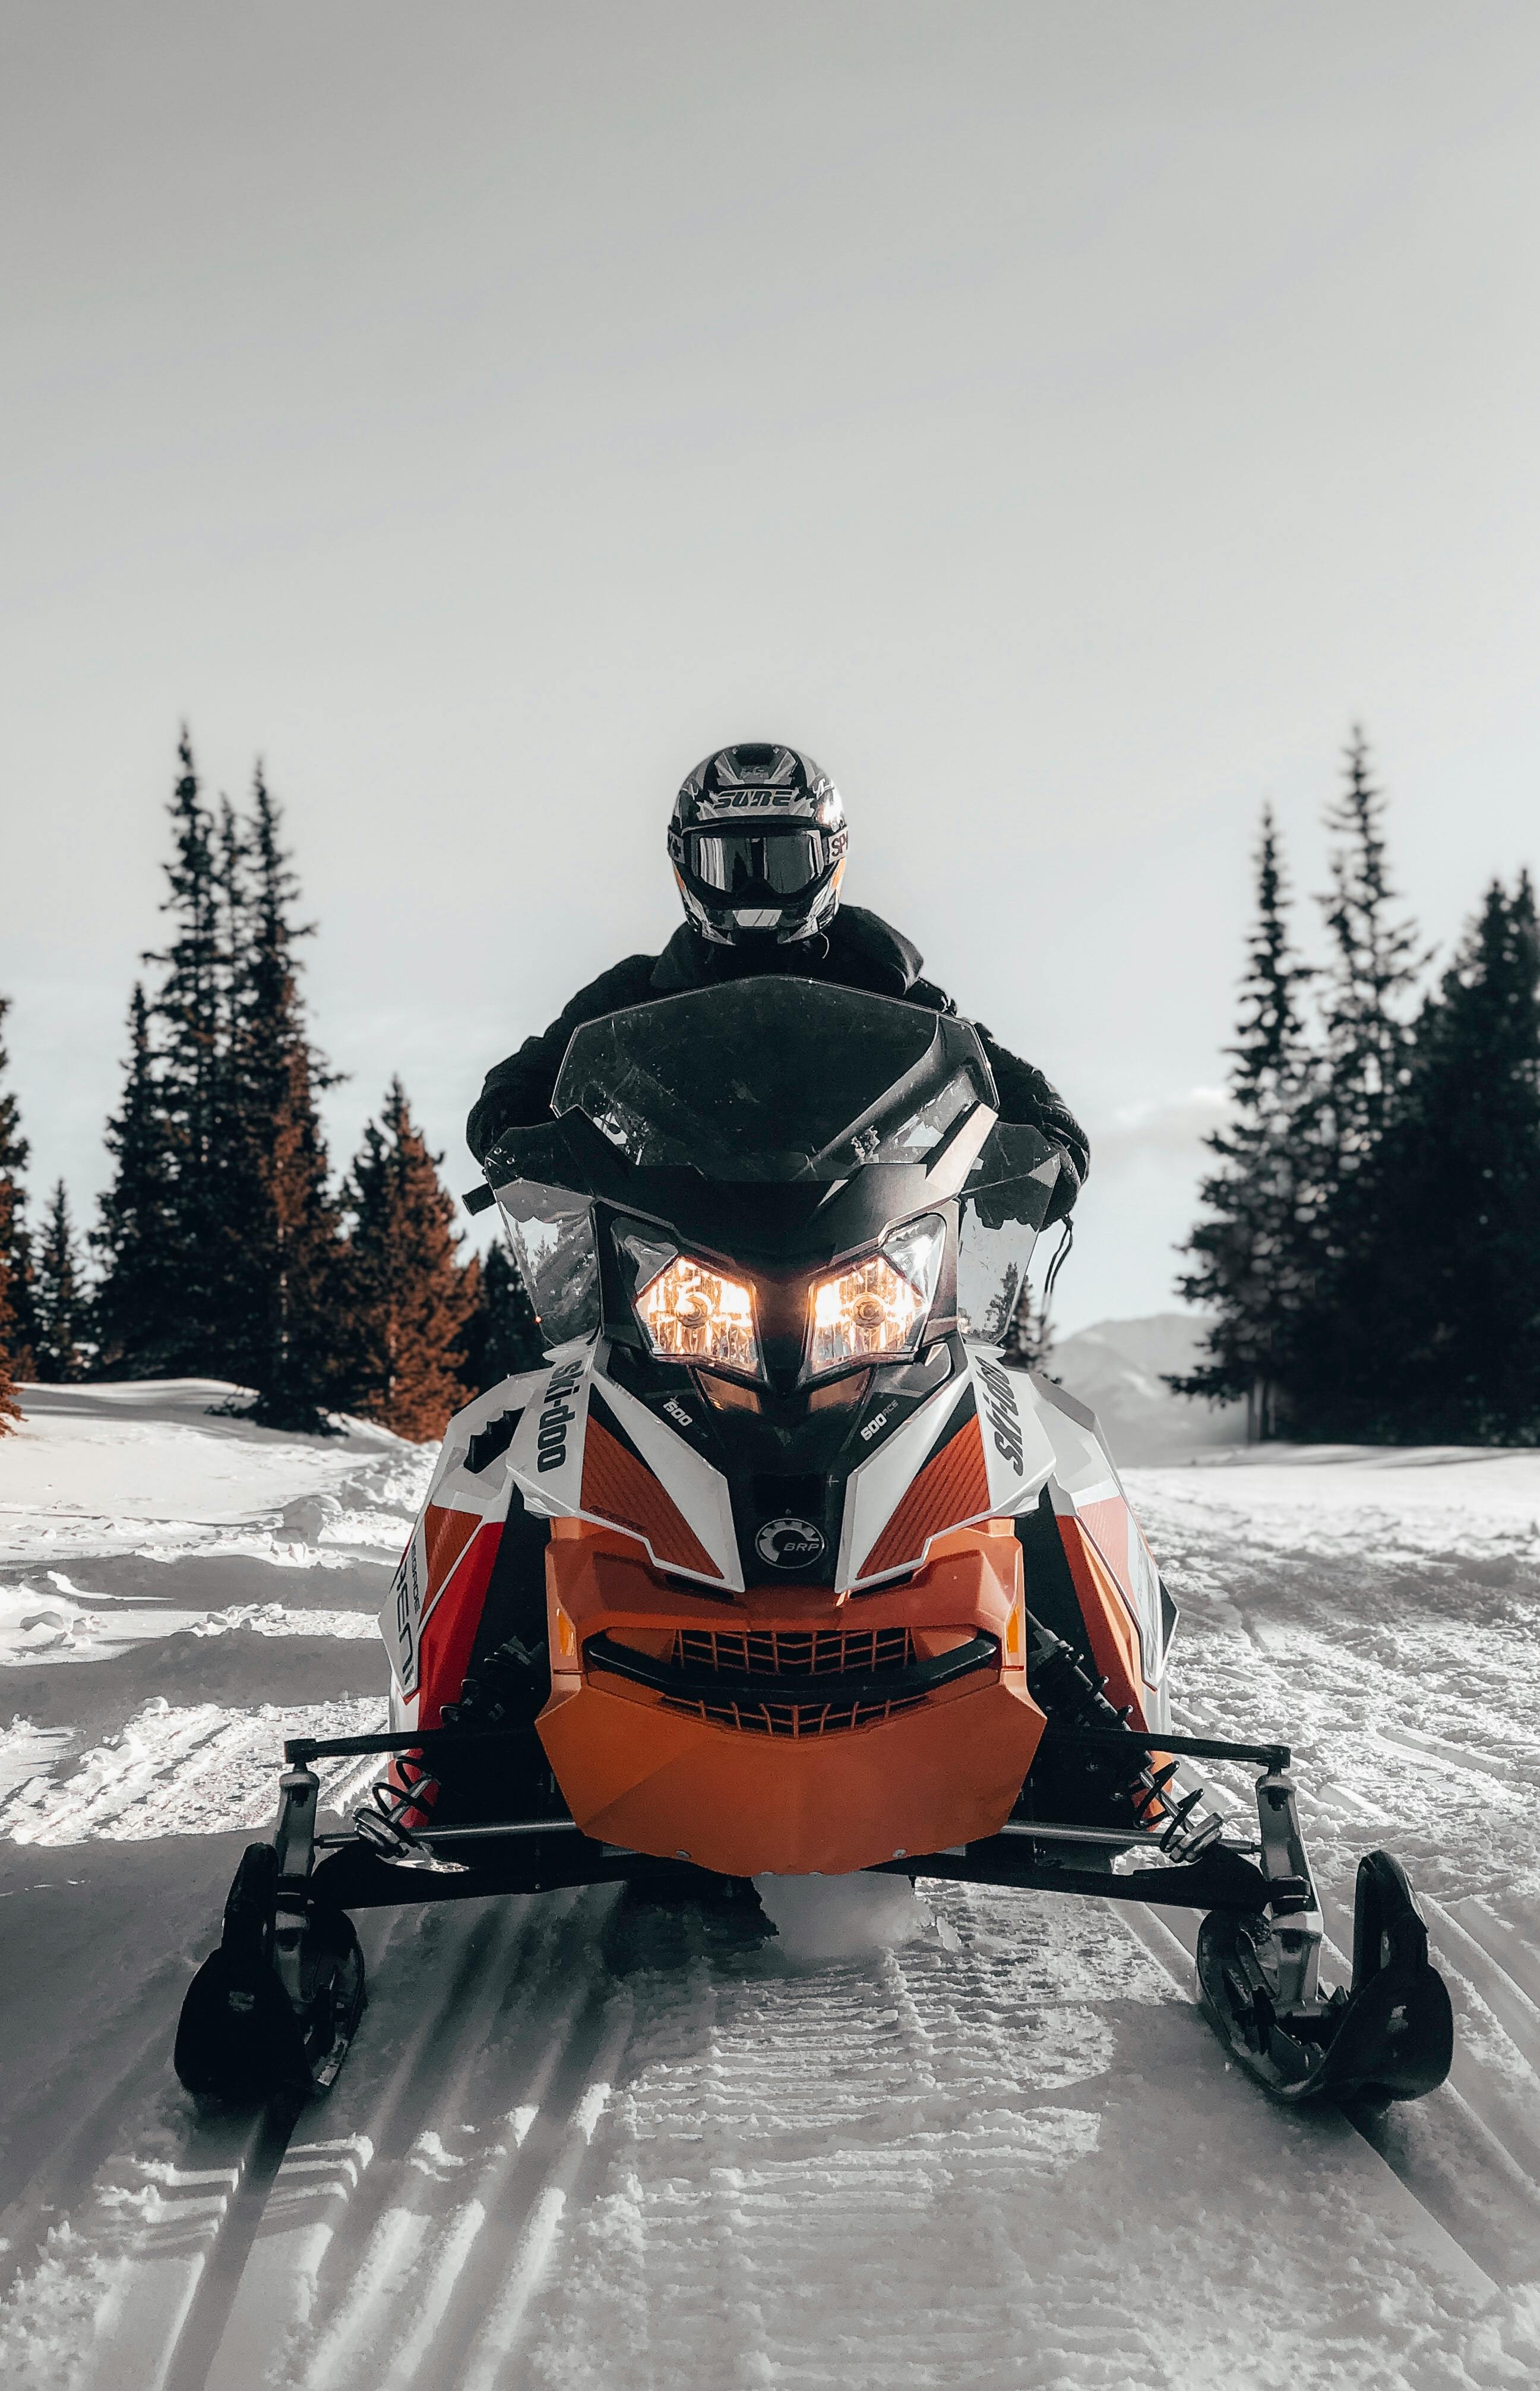 Download wallpaper 800x1420 snowmobile sports racing snow winter iphone  se5s5c5 for parallax hd background